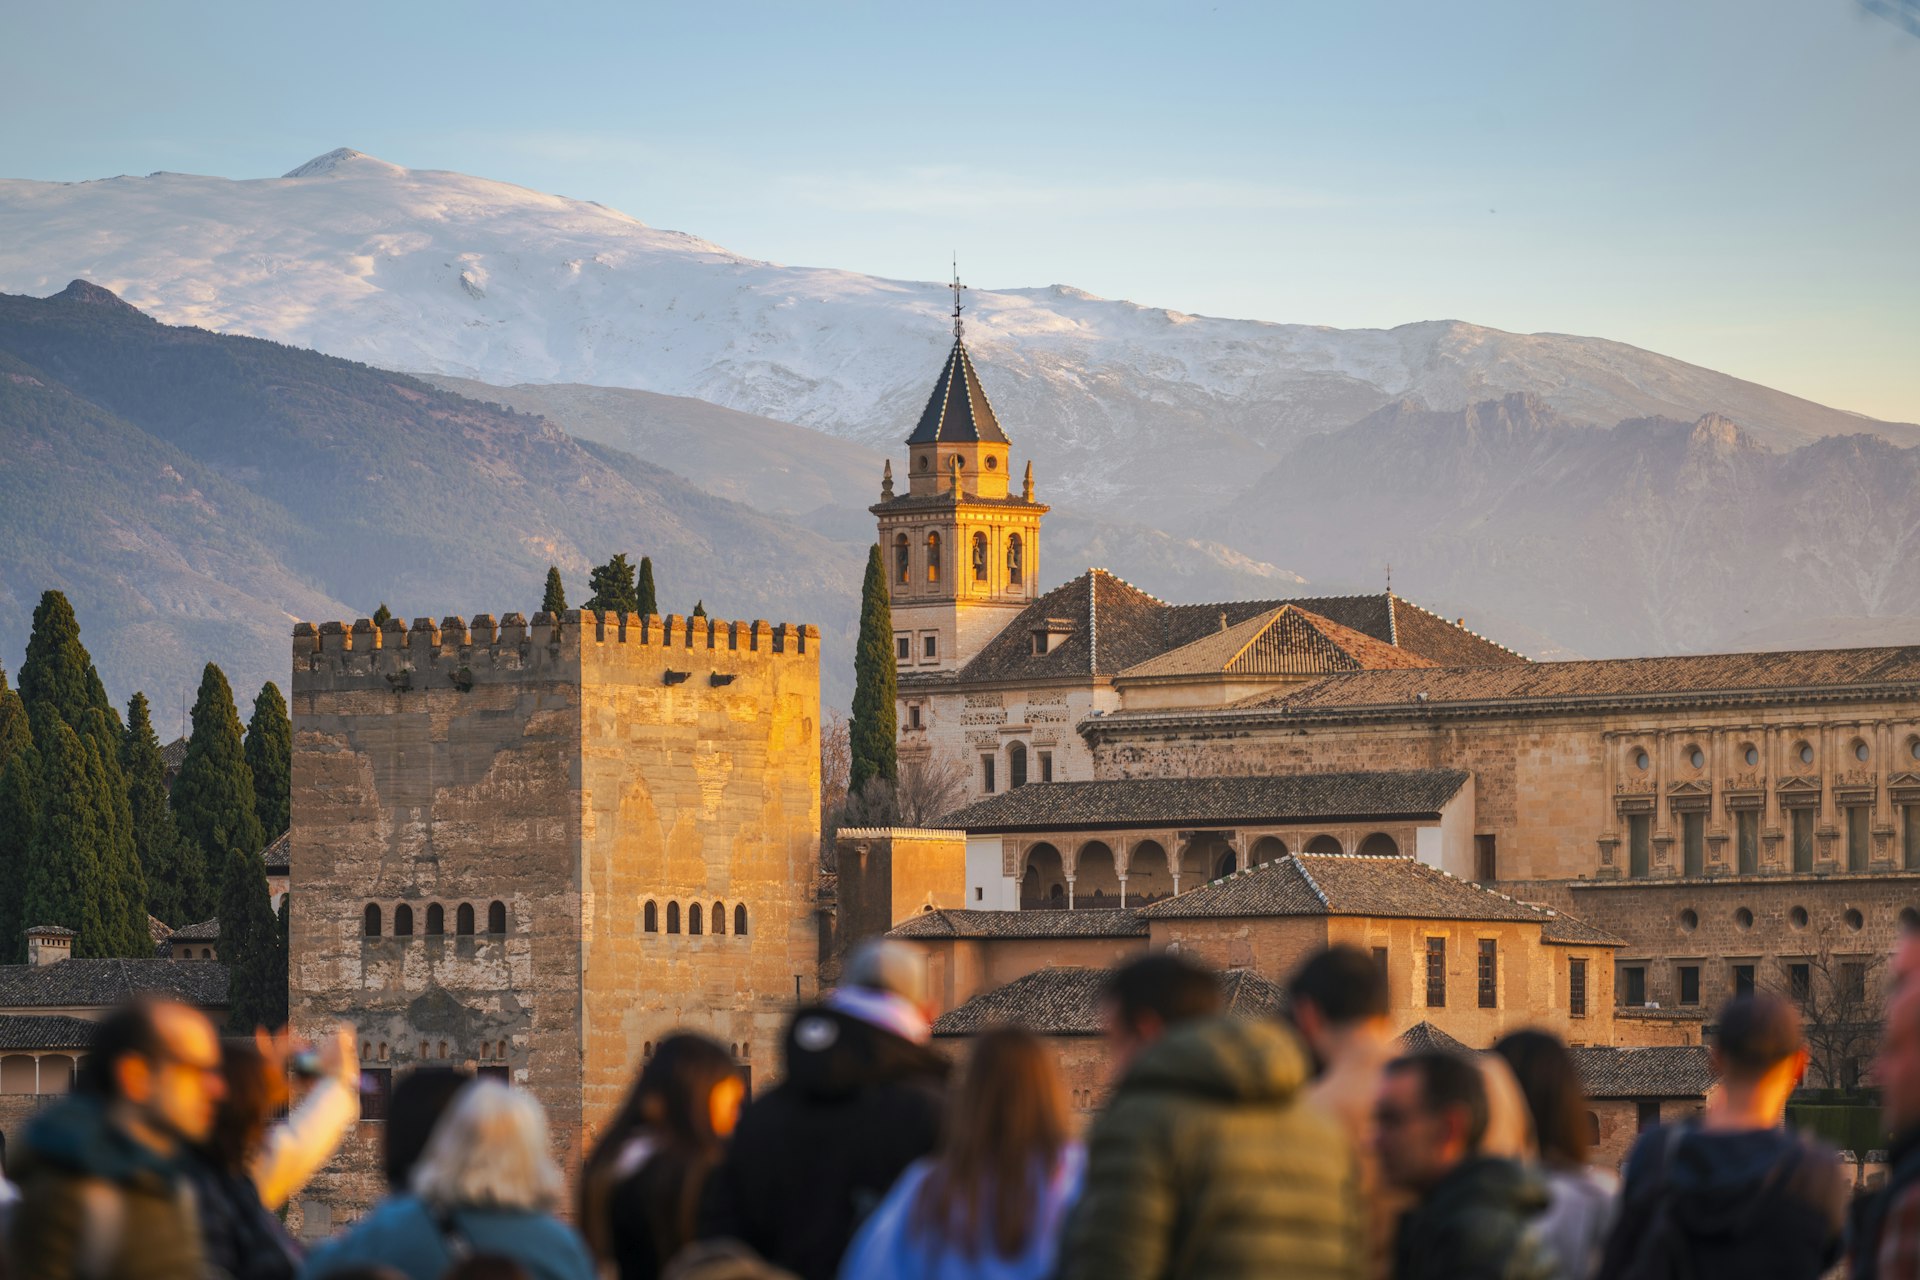 A crowd of tourists admires the Alhambra at sunset, Granada, Andalucía, Spain